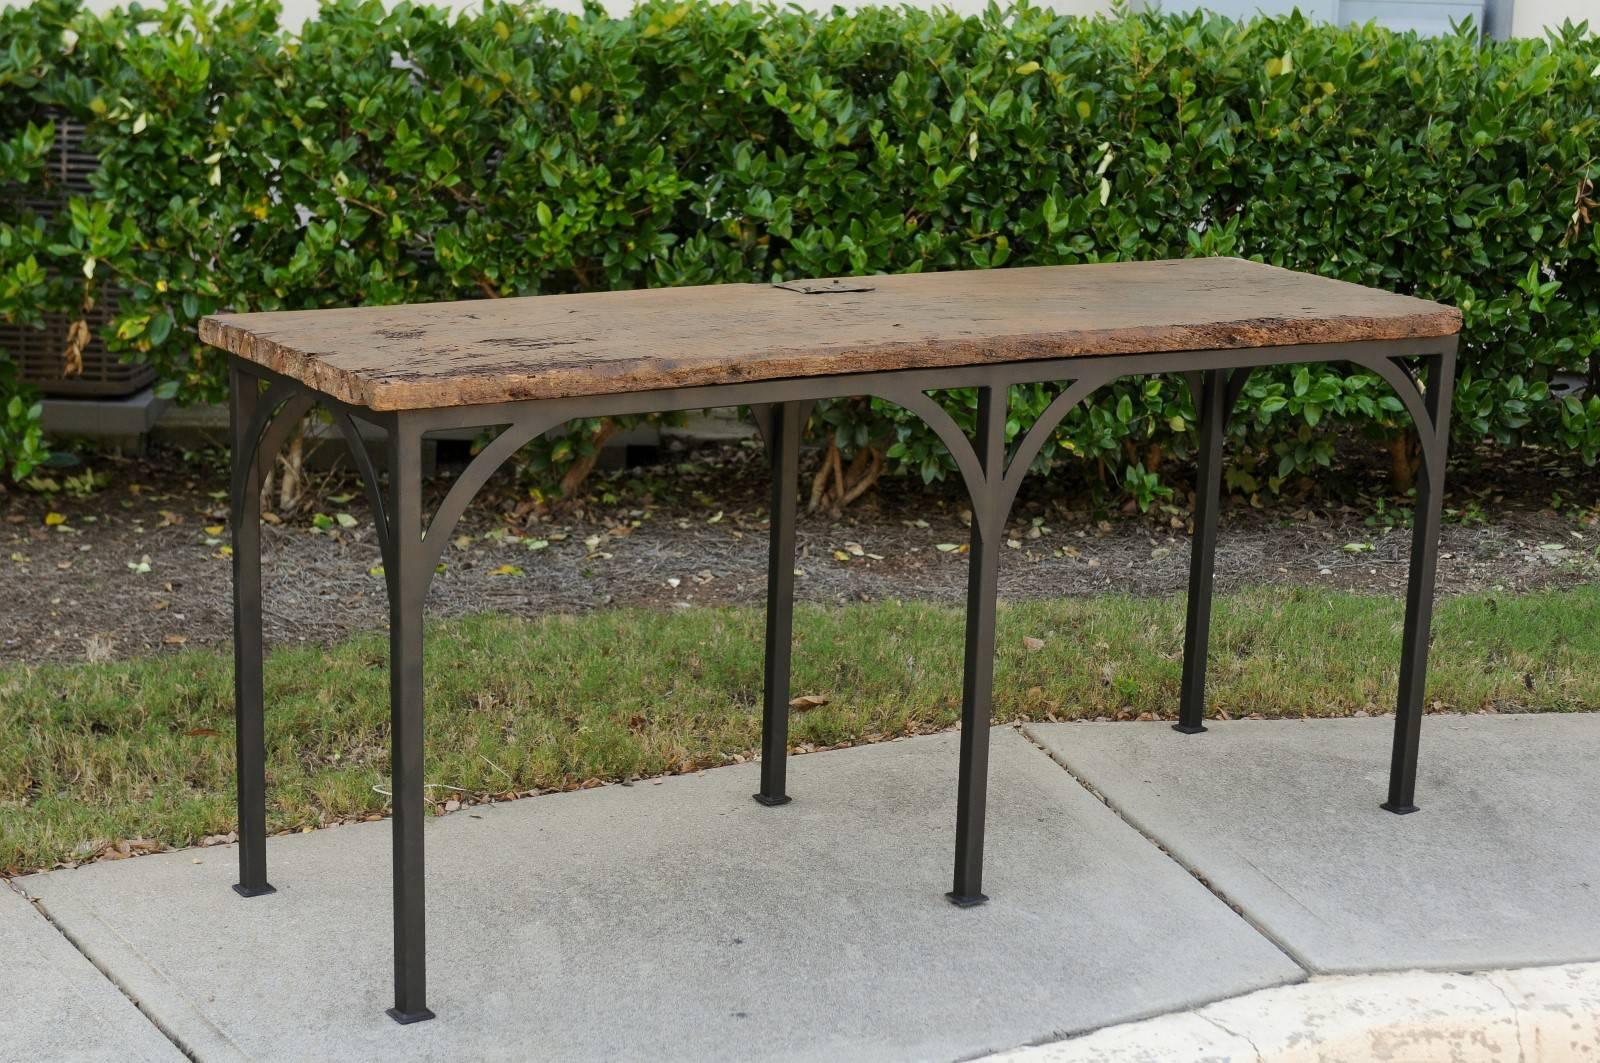 A contemporary rustic console table made of an 18th century Spanish chestnut board mounted on a custom iron base. This handsome console table features a rectangular top made of a nicely weathered chestnut board, secured on custom iron base. This